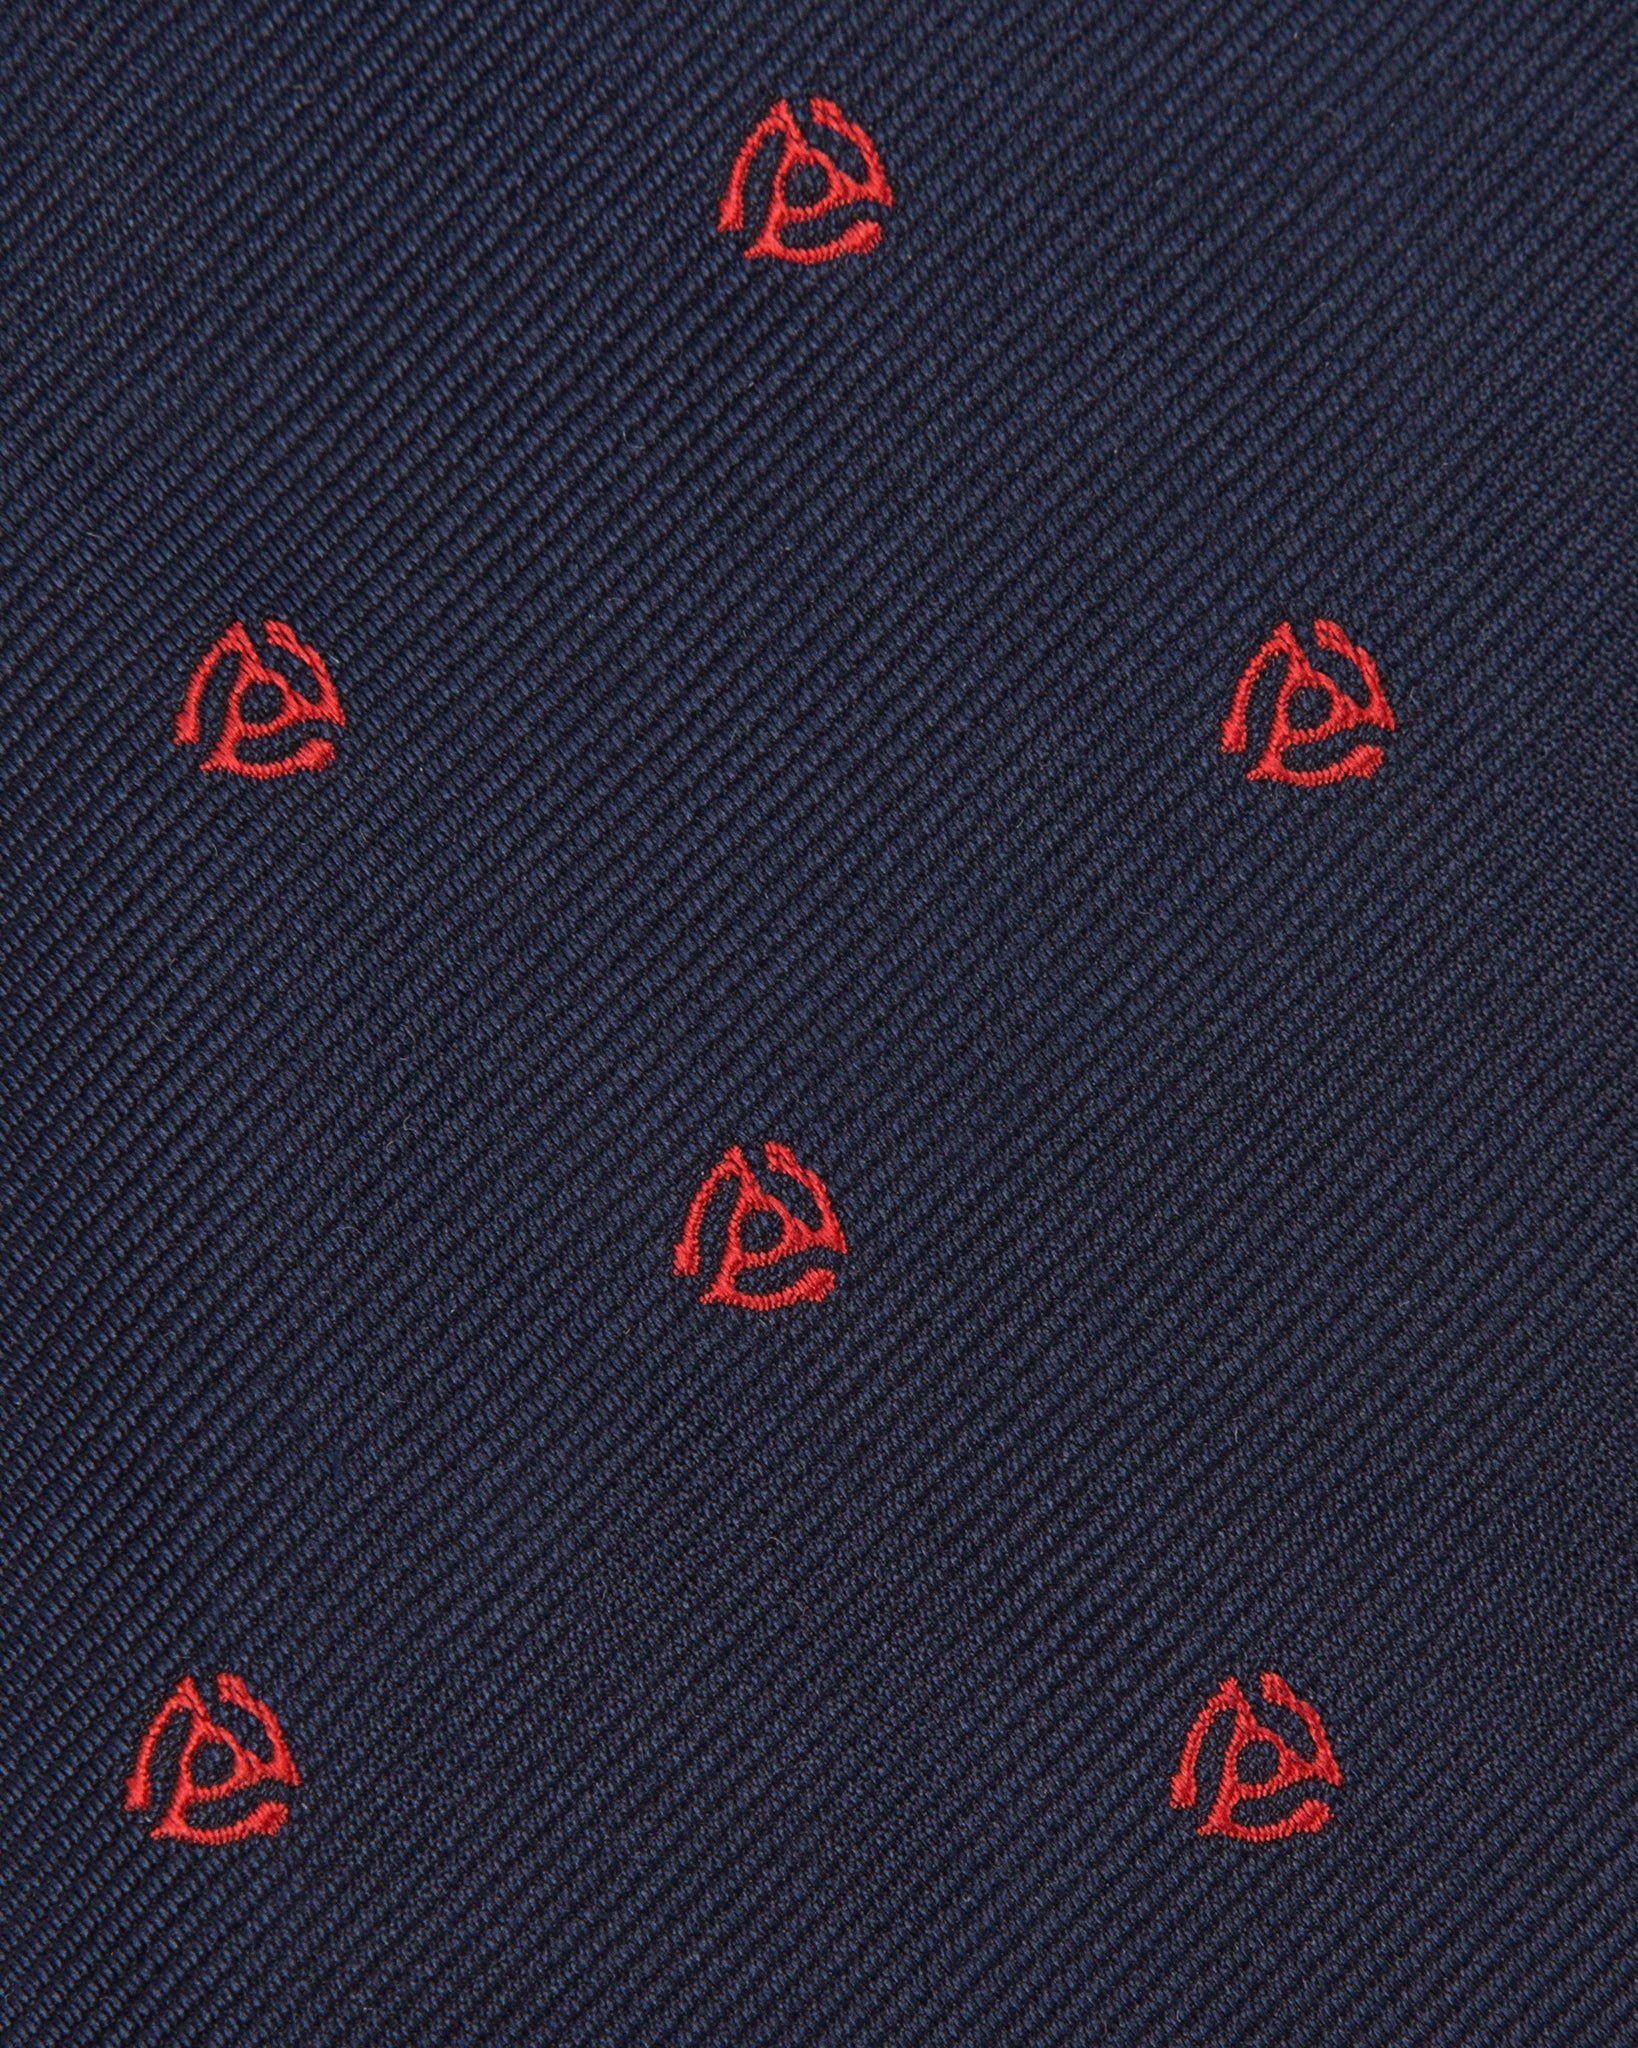 Silk Woven Club Tie Navy/Red 45 Turntable Adapter